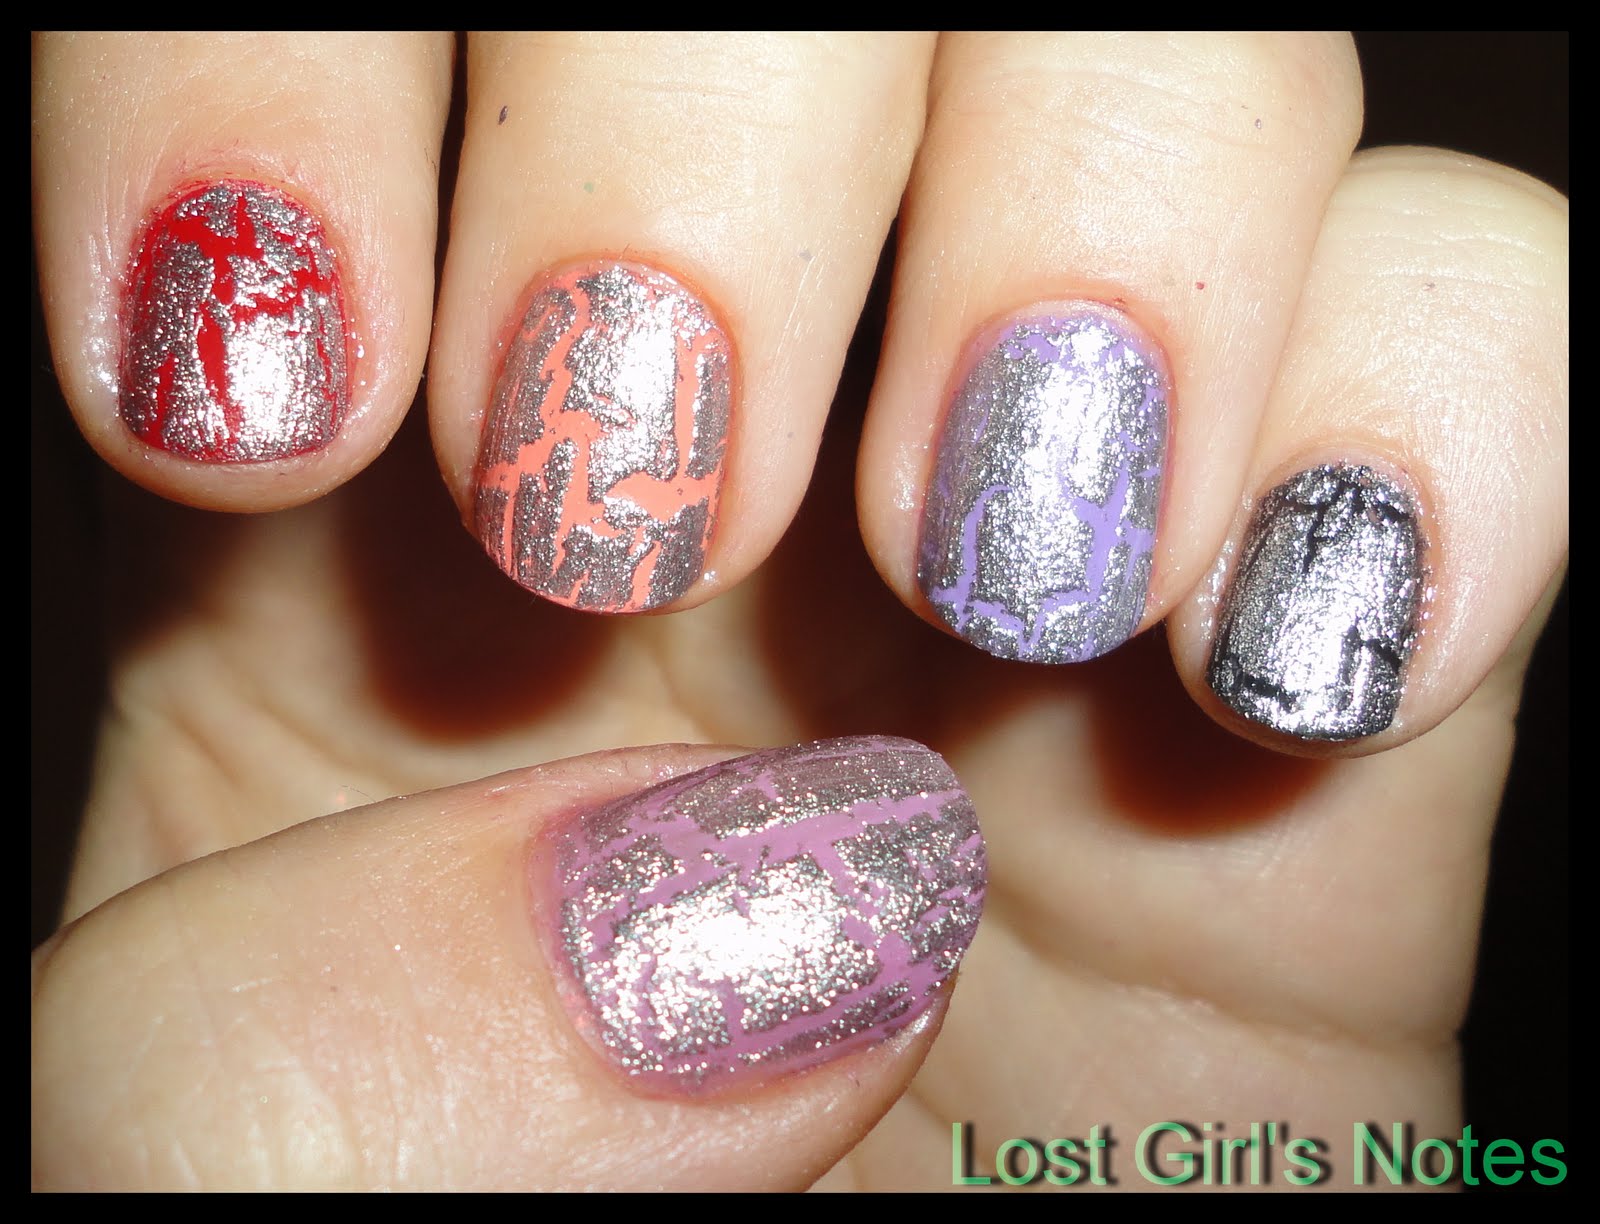 10. OPI Shatter Nail Polish in Silver Shatter - wide 2